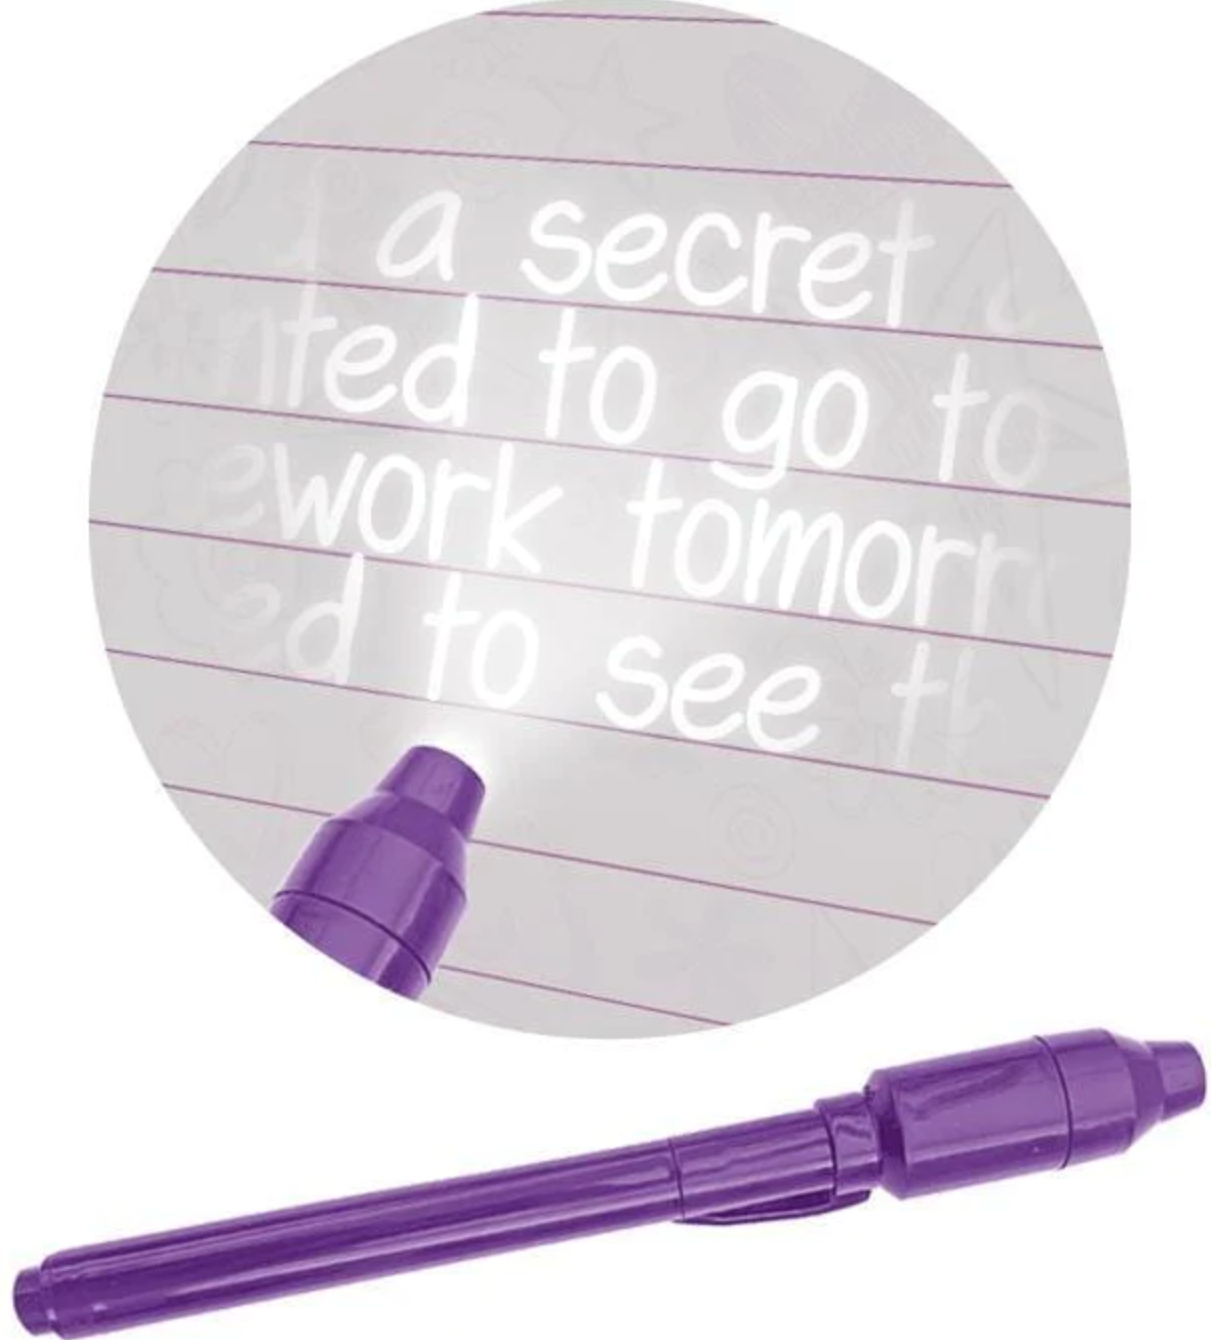 Secrets & Dreams Invisible Ink Diary